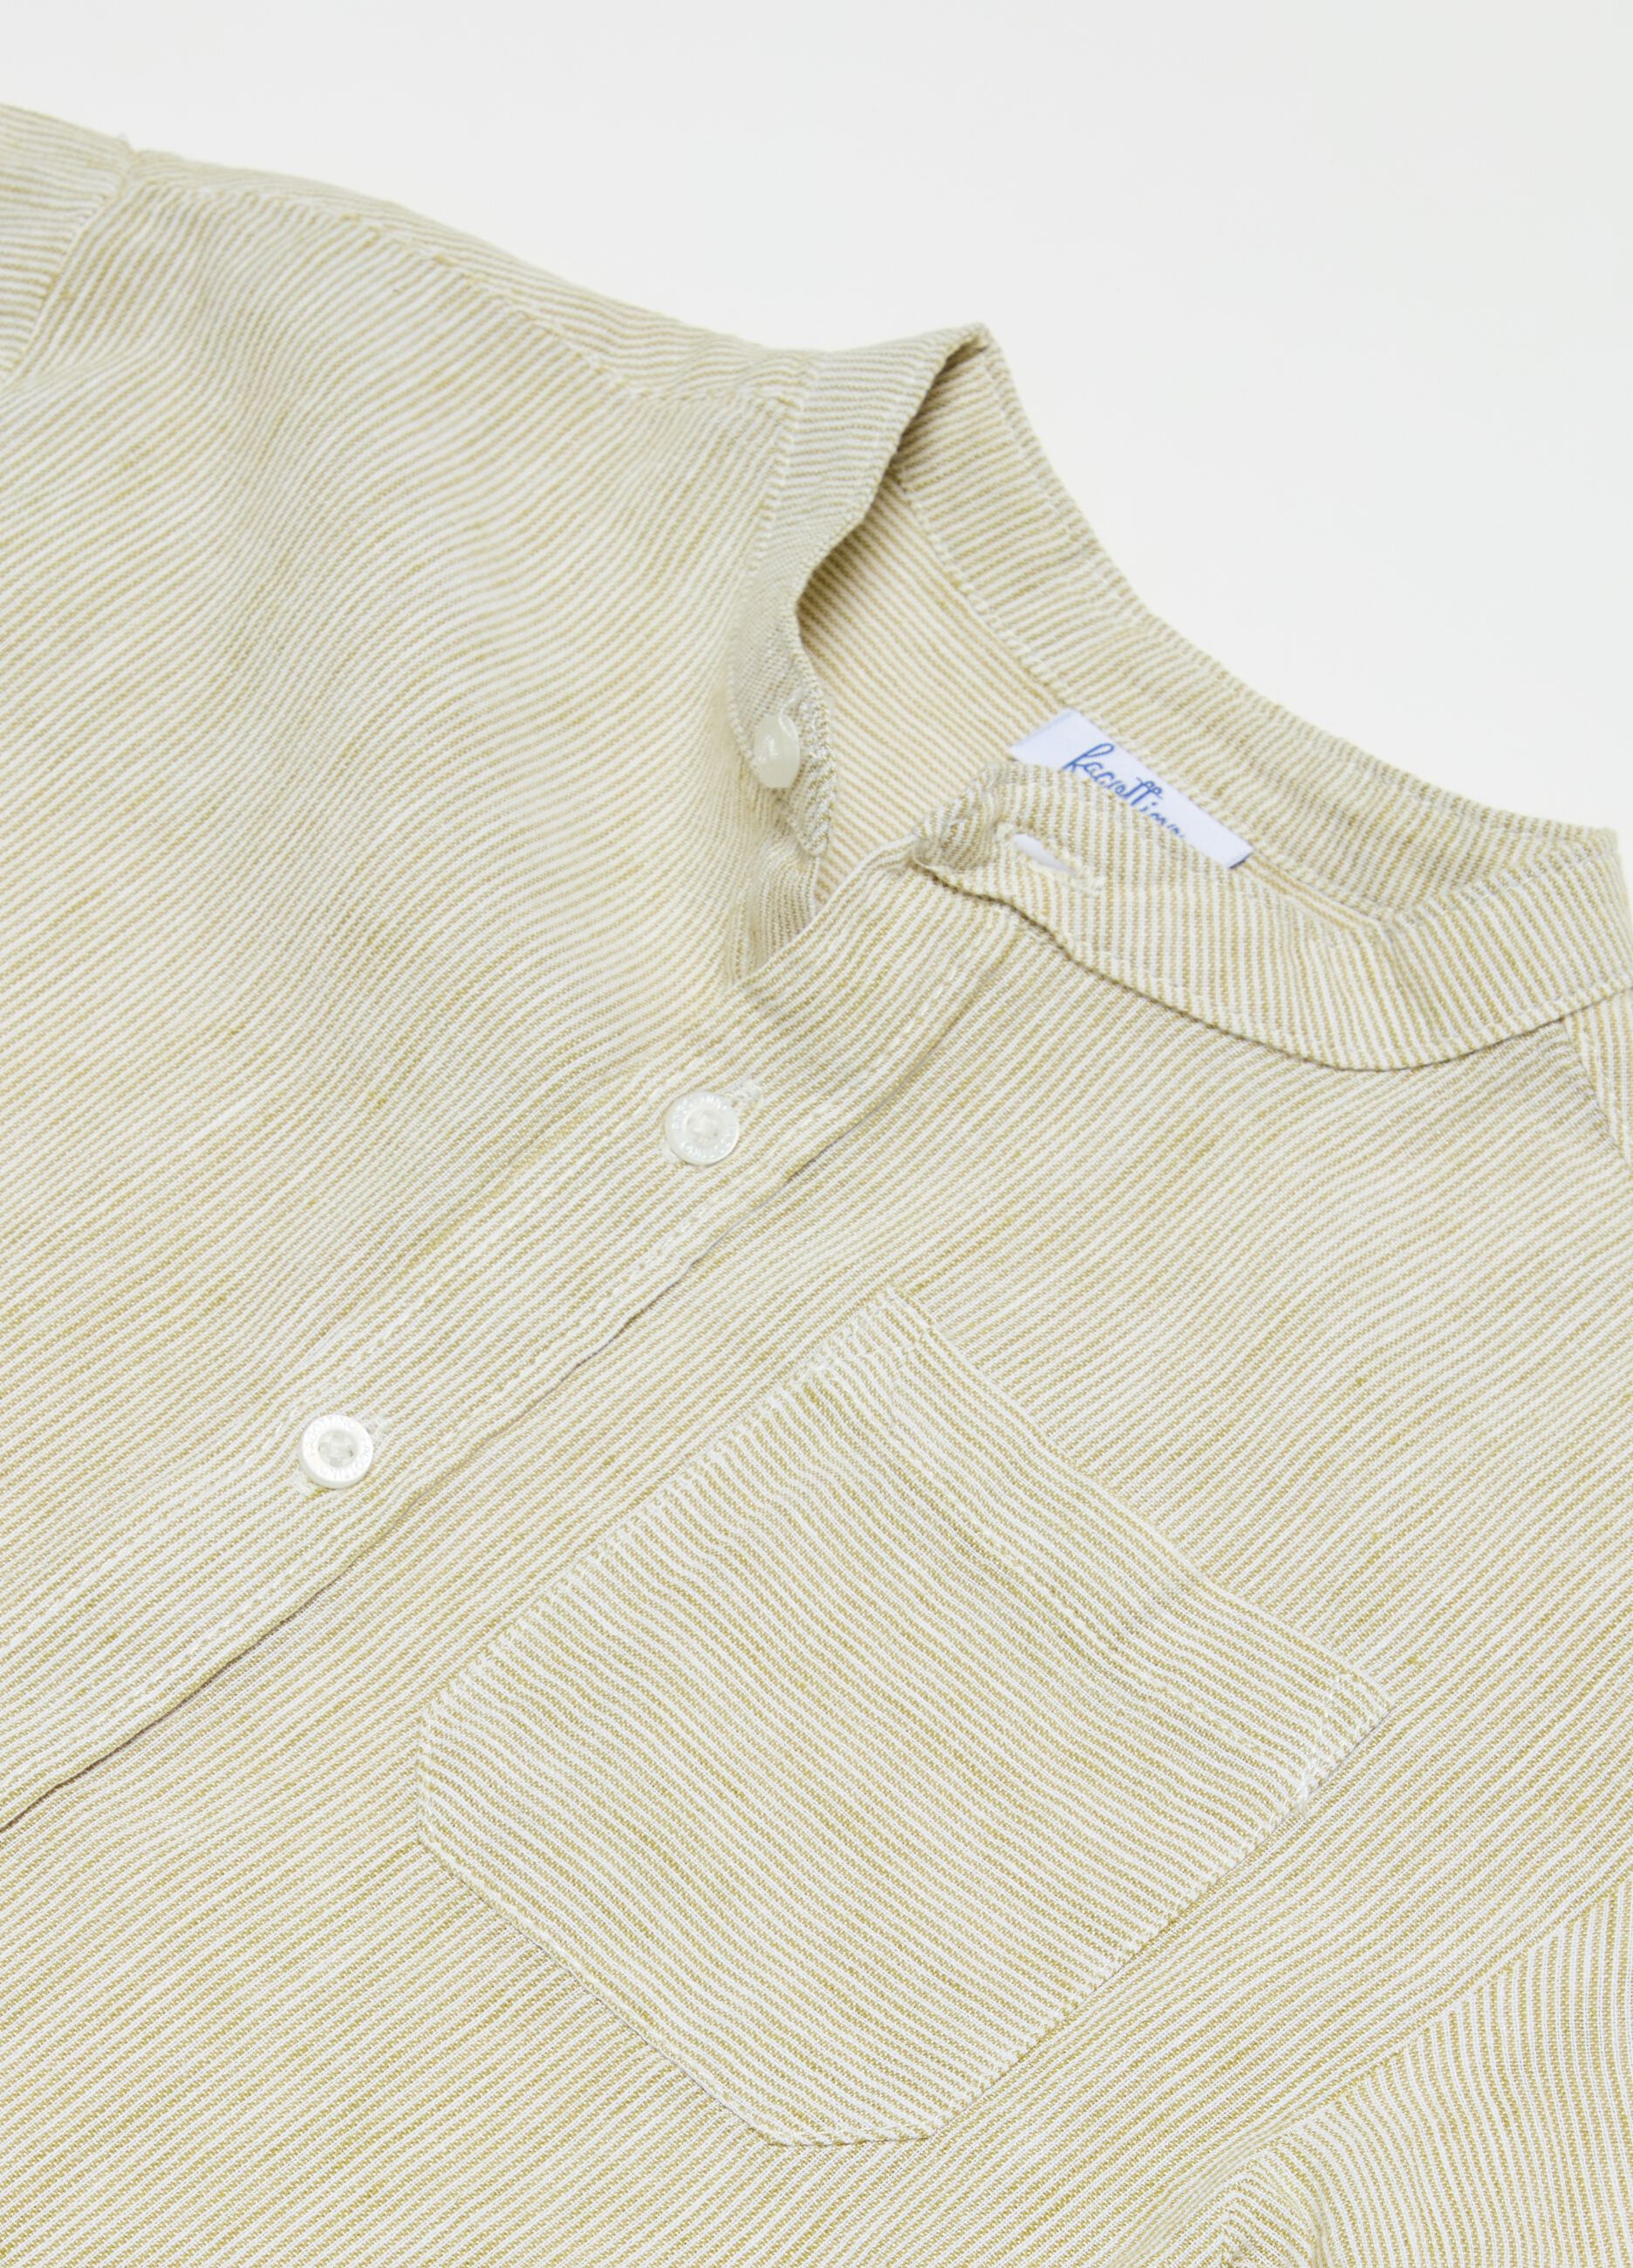 Linen and cotton shirt with top pocket